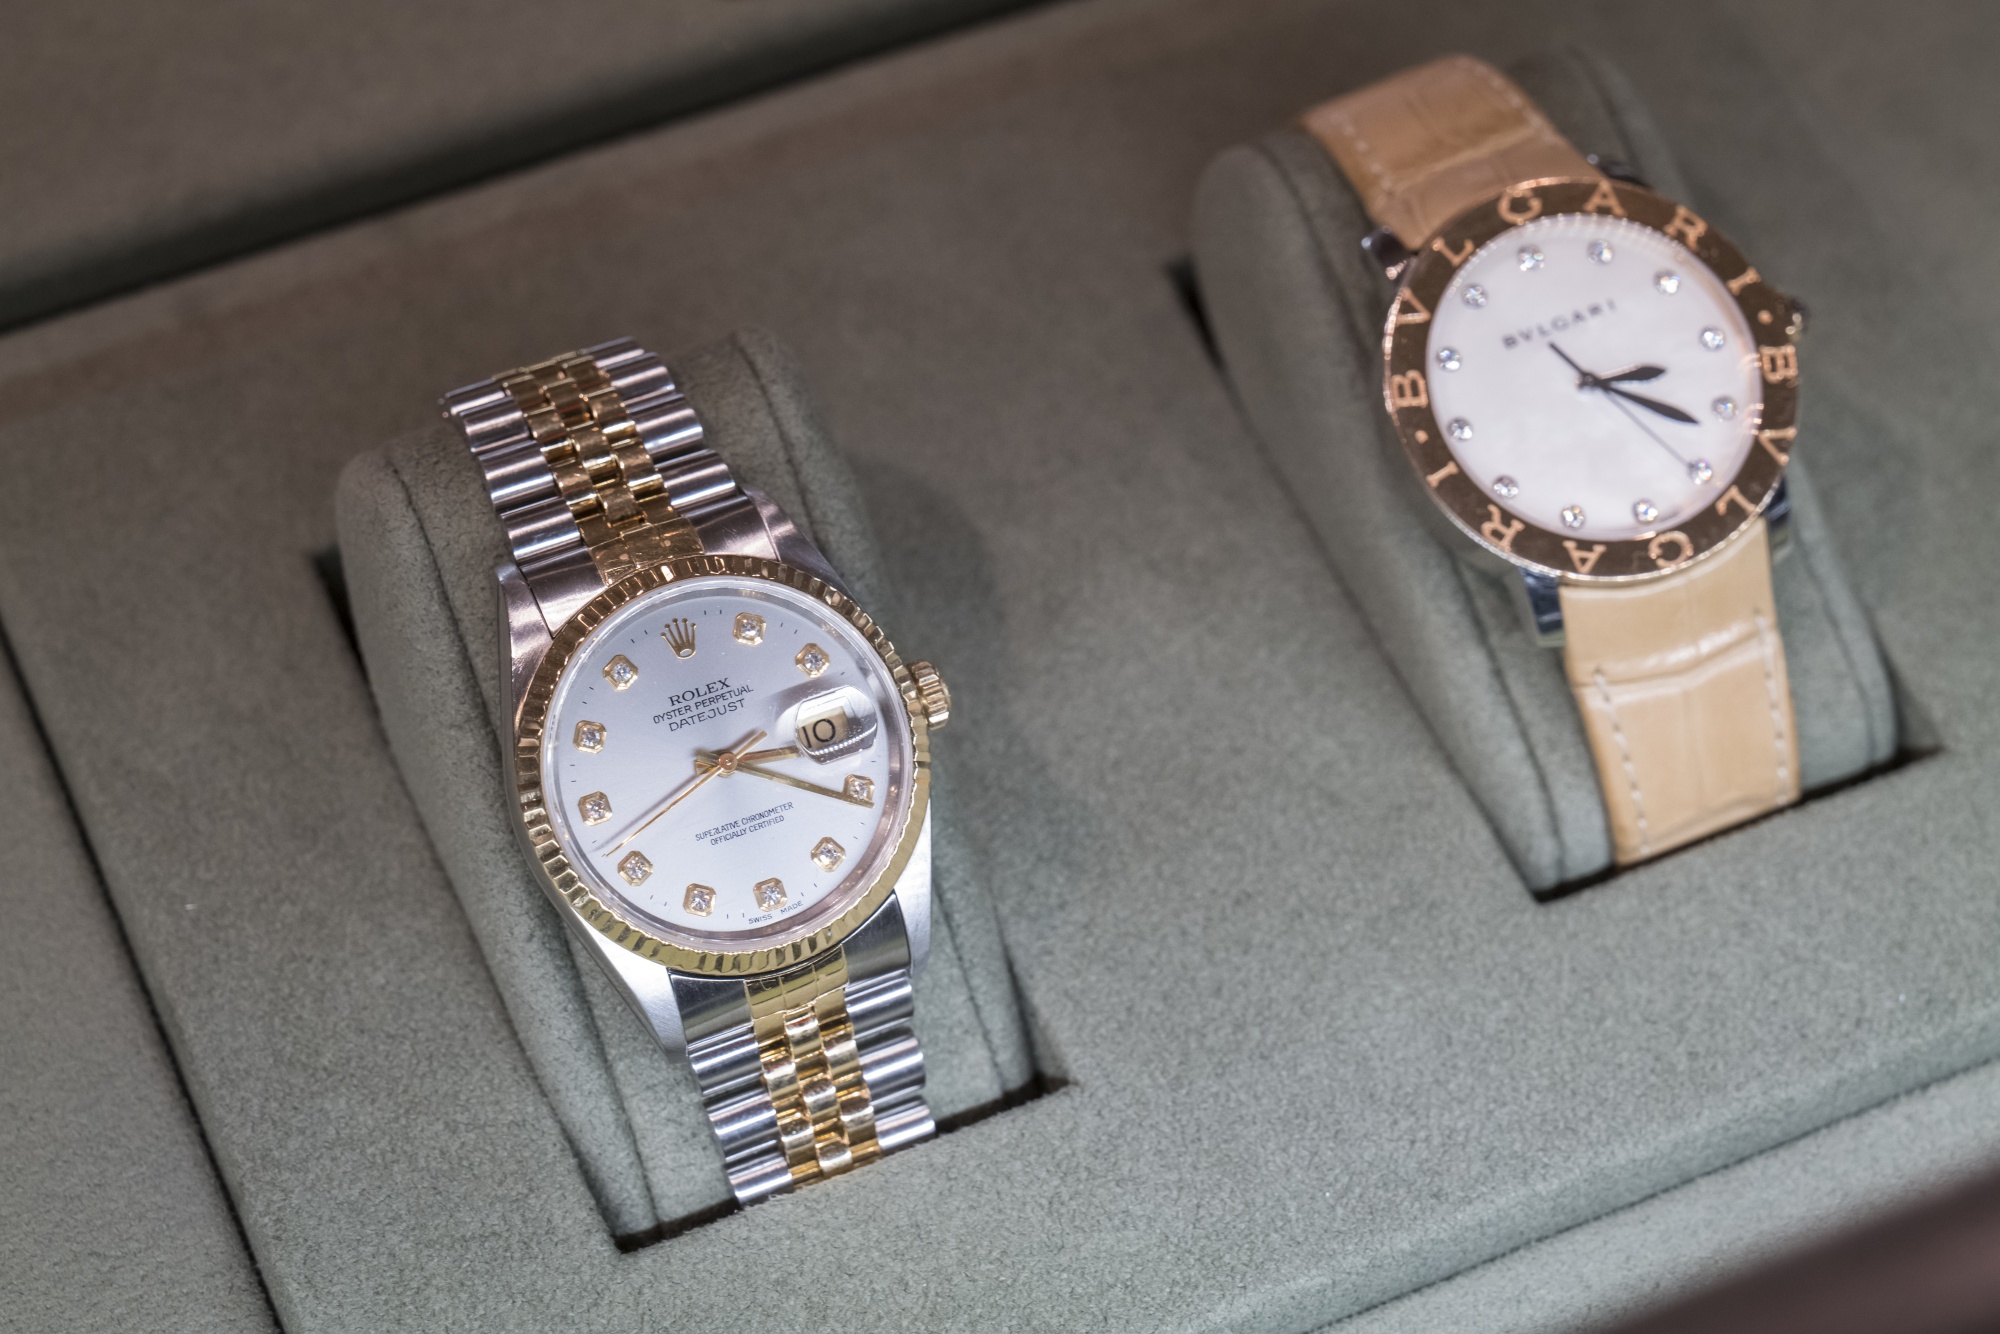 Two-tone Watches Are Back in Style - Chrono24 Magazine